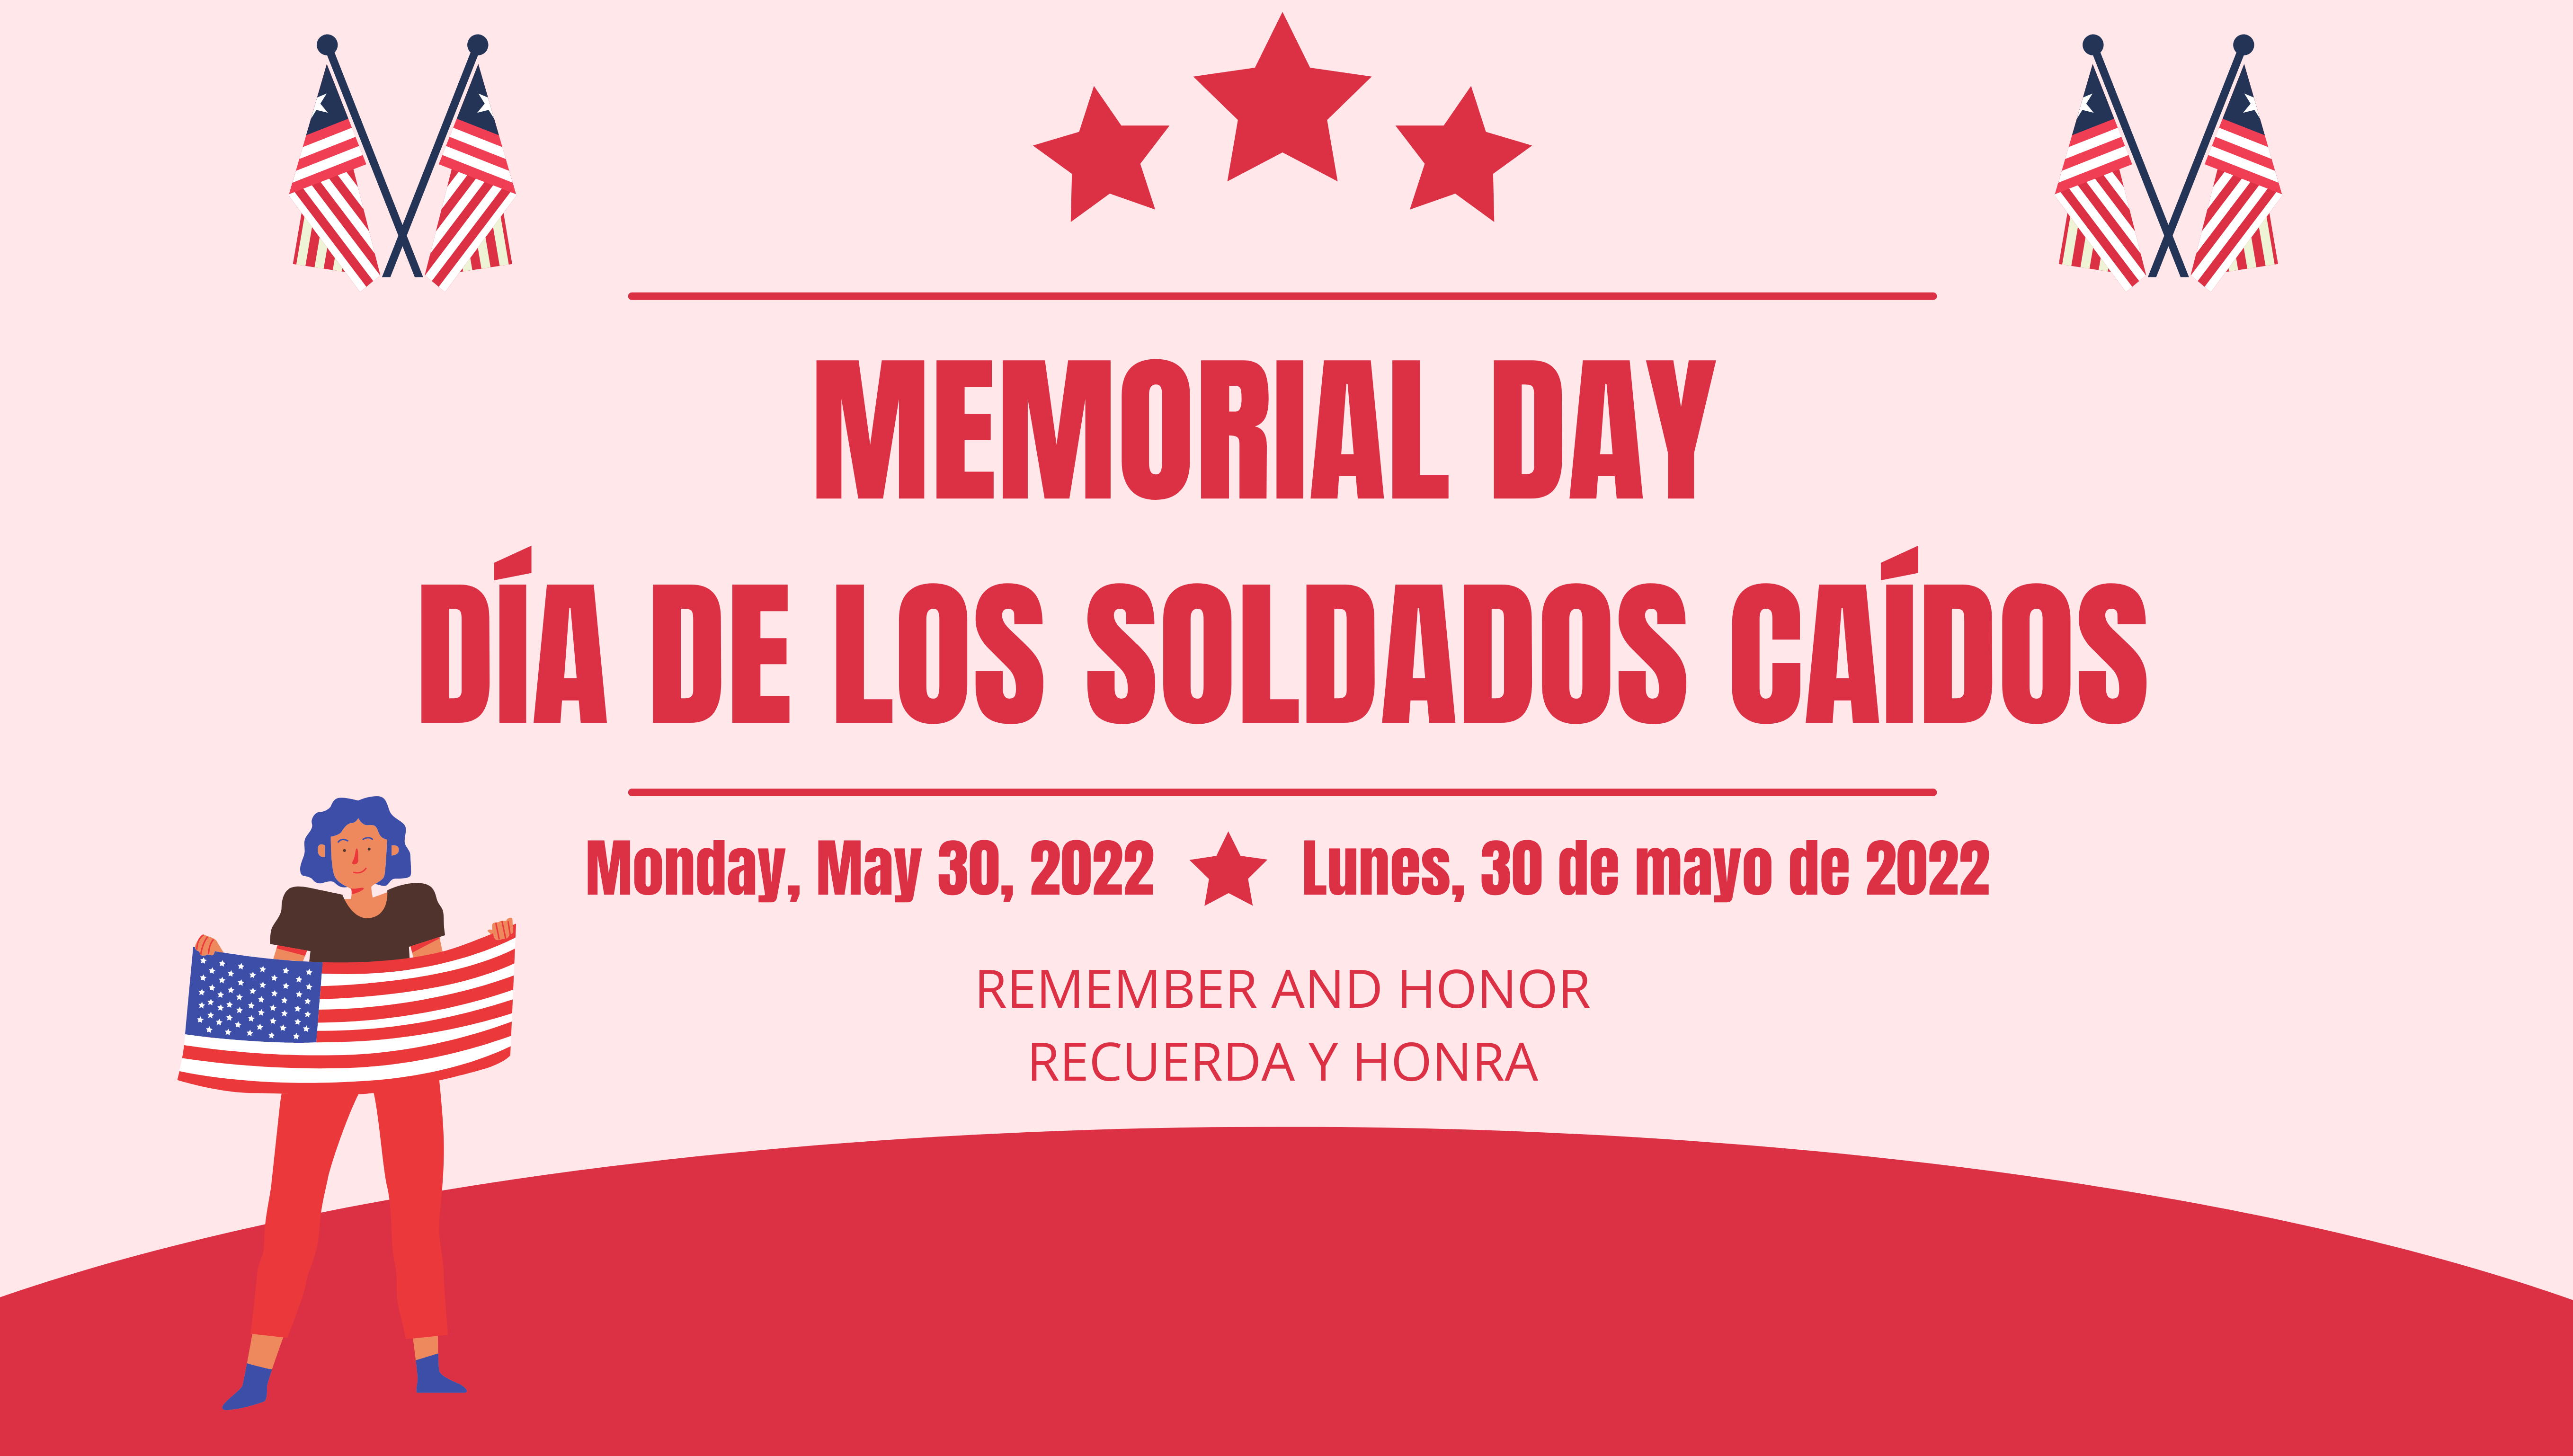 Red text on pink background with image of person holding a flag. Text says, "Memorial Day, Monday, May 30, 2022, Remember and Honor."